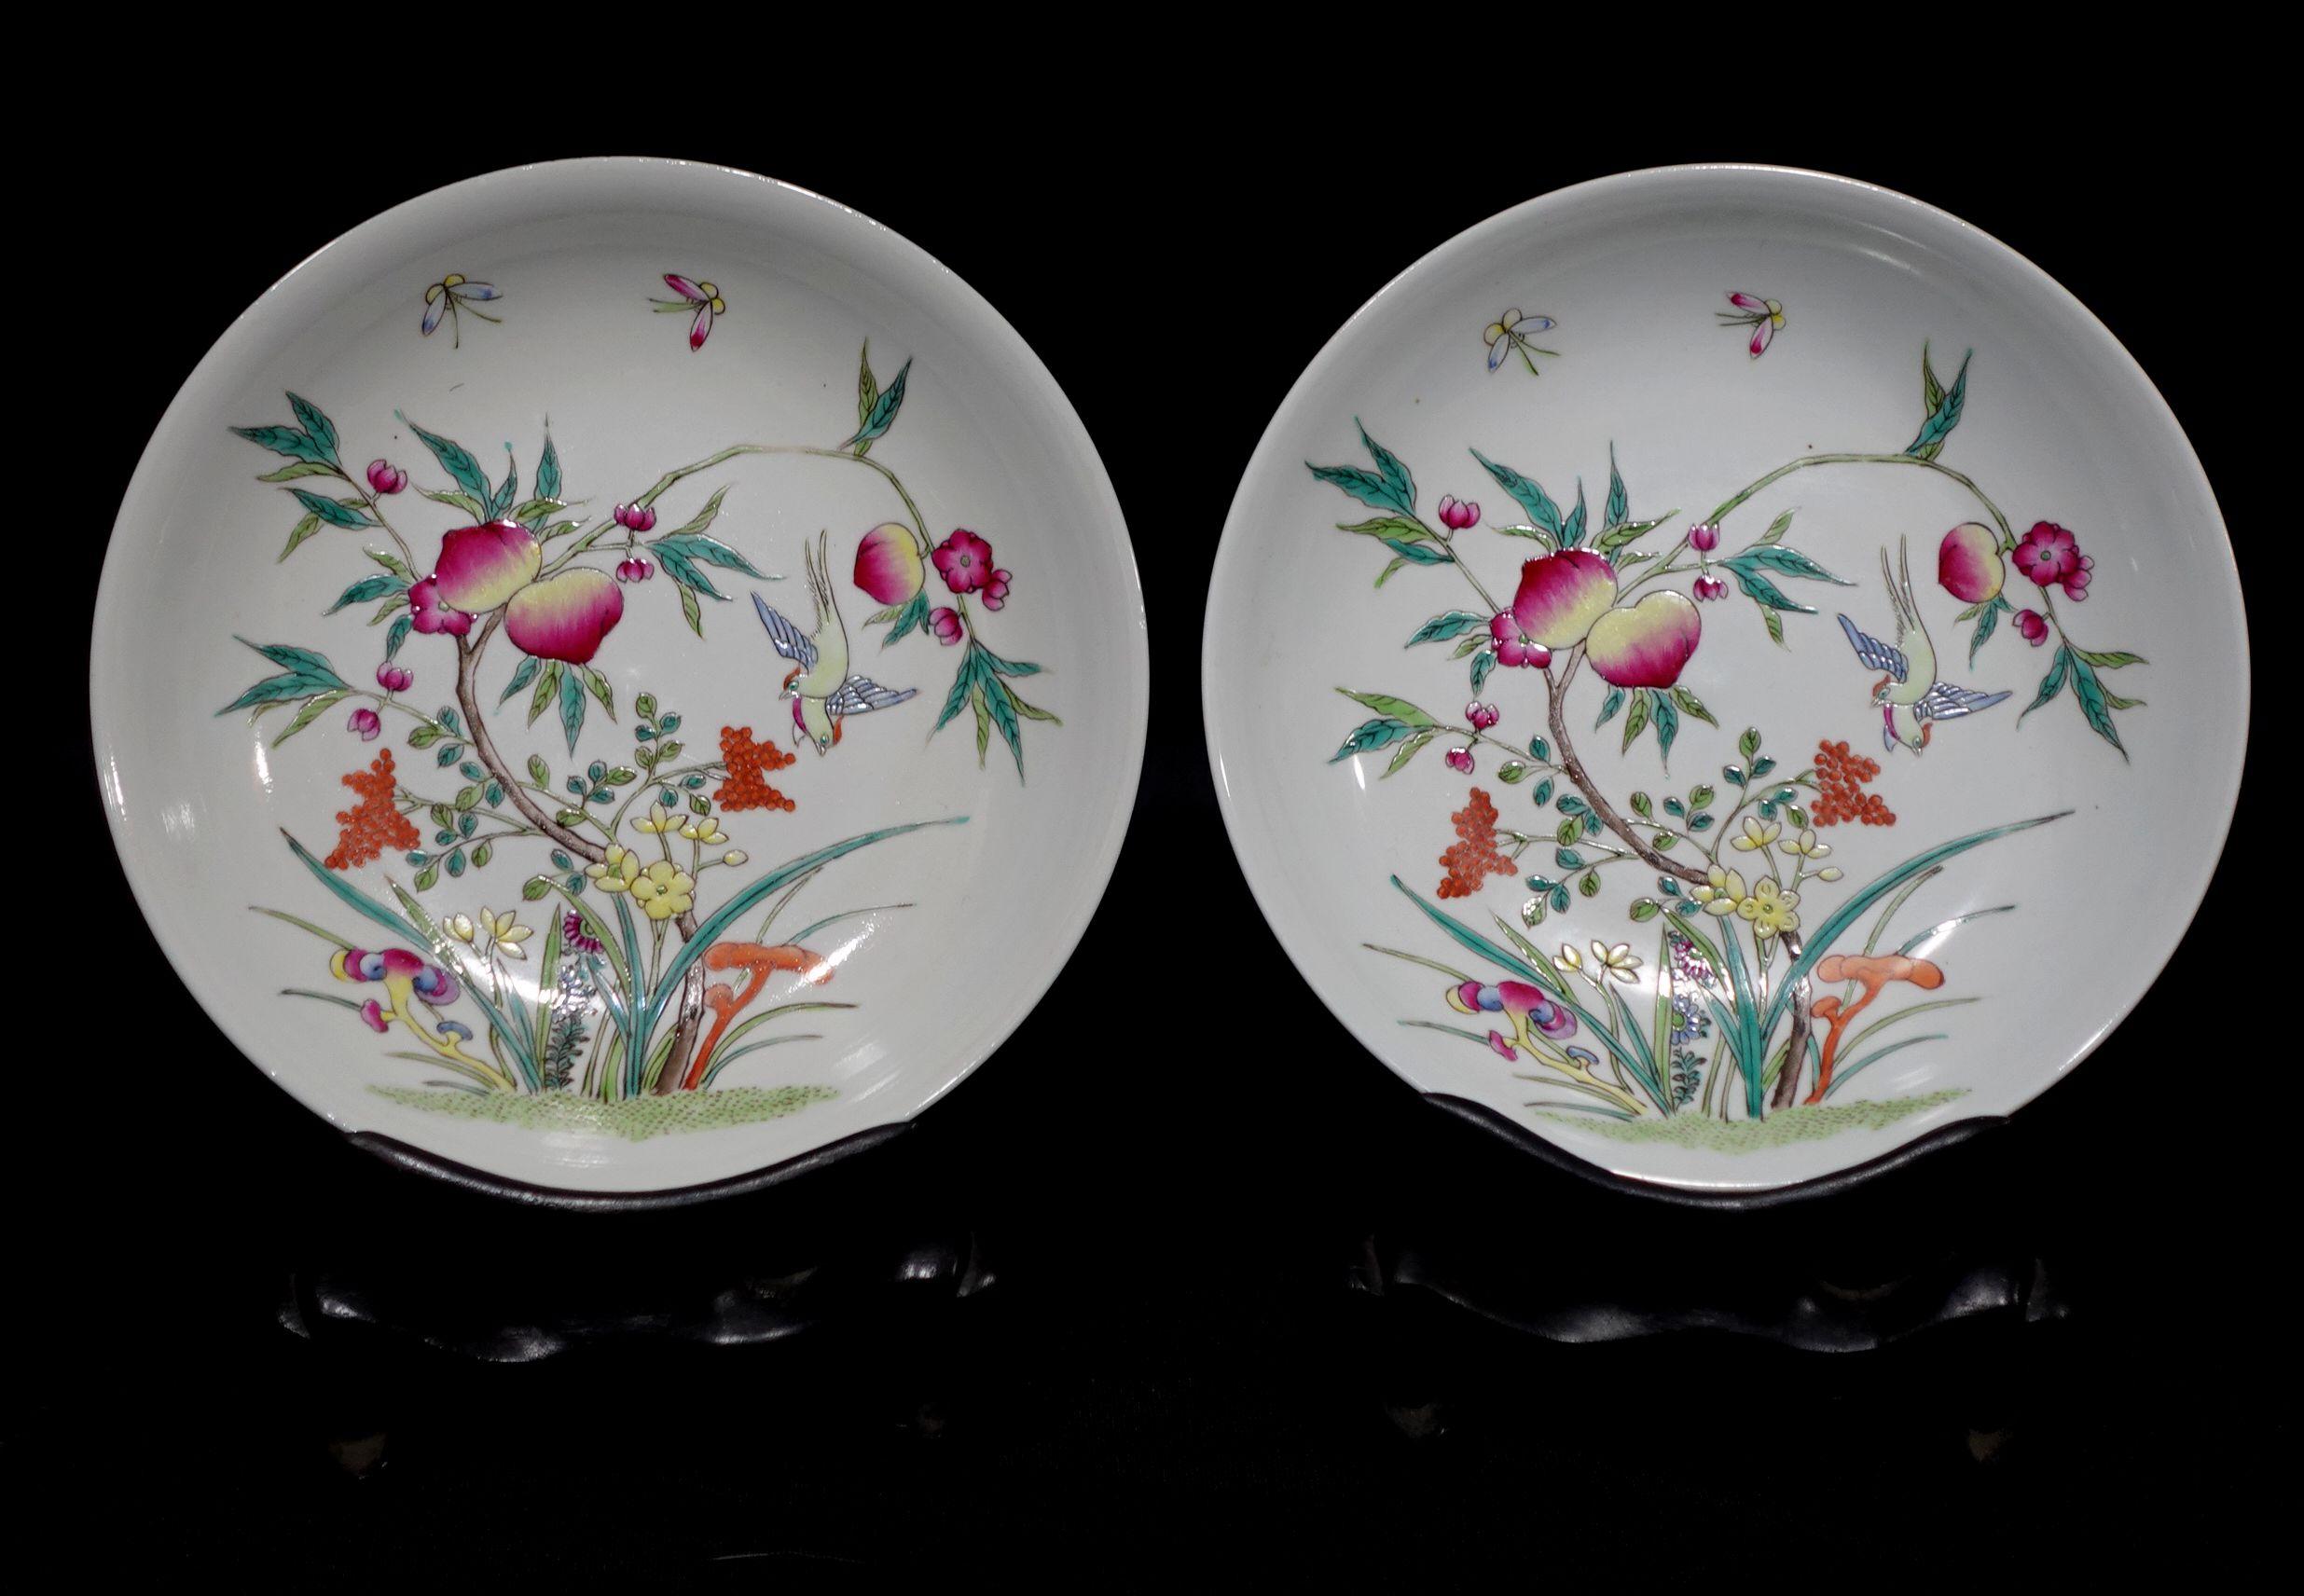 Antique - A Fine Pair of Famille Rose Plates with the marks of  荊桂堂金, from the
19th Century, 1862 to 1874, Tongzhi Period. The two special wood stands are included.
The plates have a very fine detailed painting depicting trees with peaches, flowers,